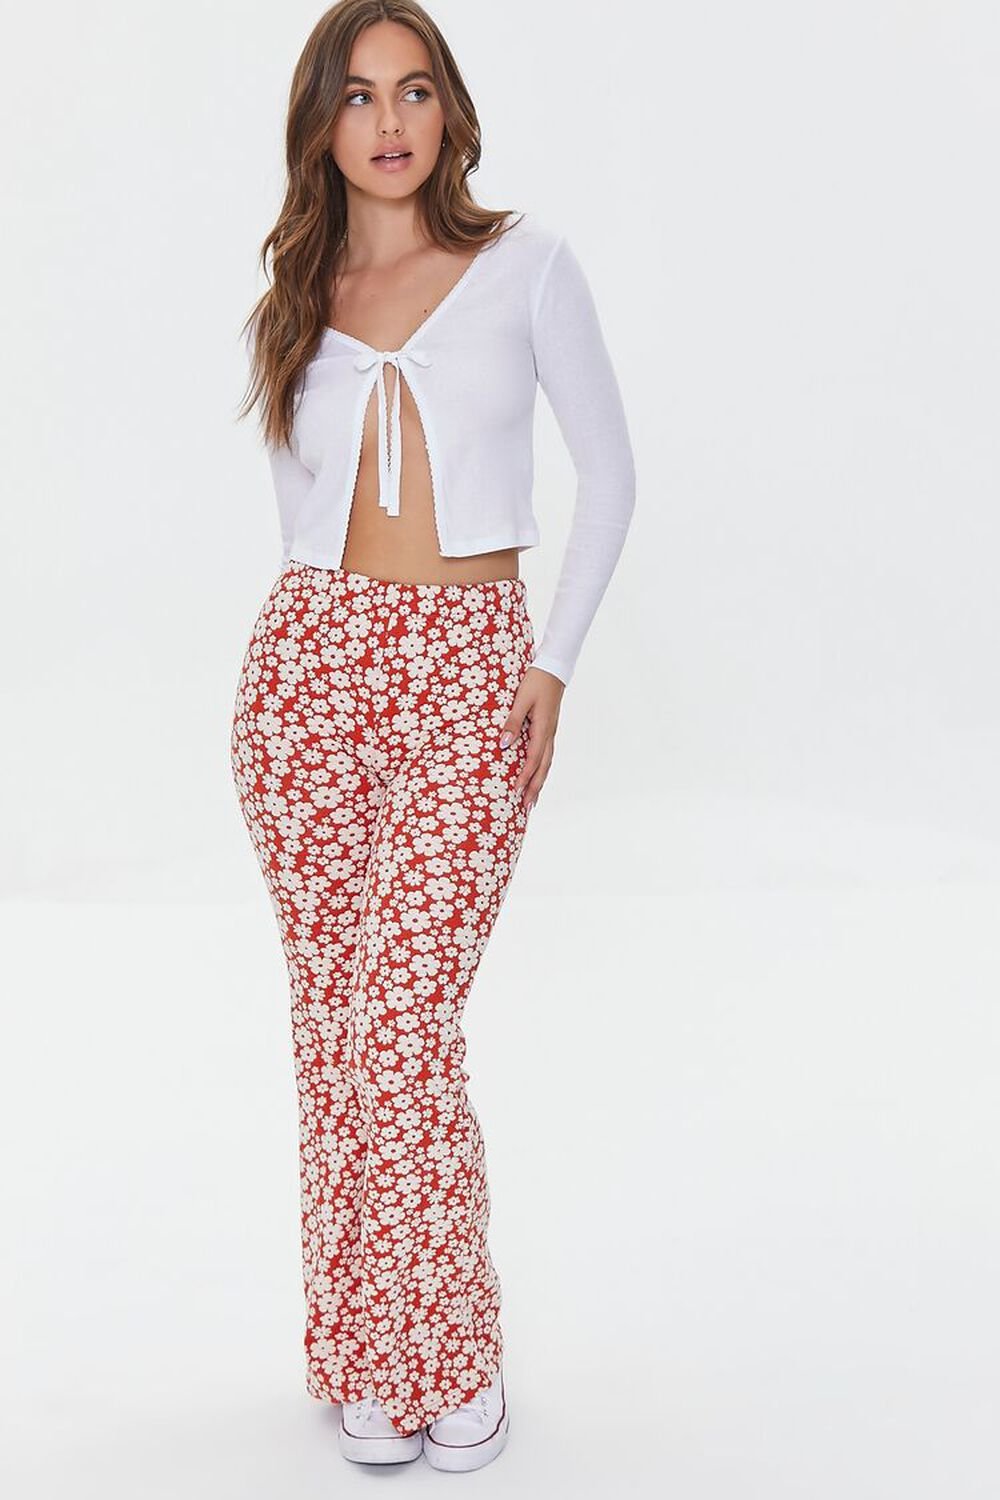 POMPEIAN RED /CREAM Floral Print Flare Pants, image 1